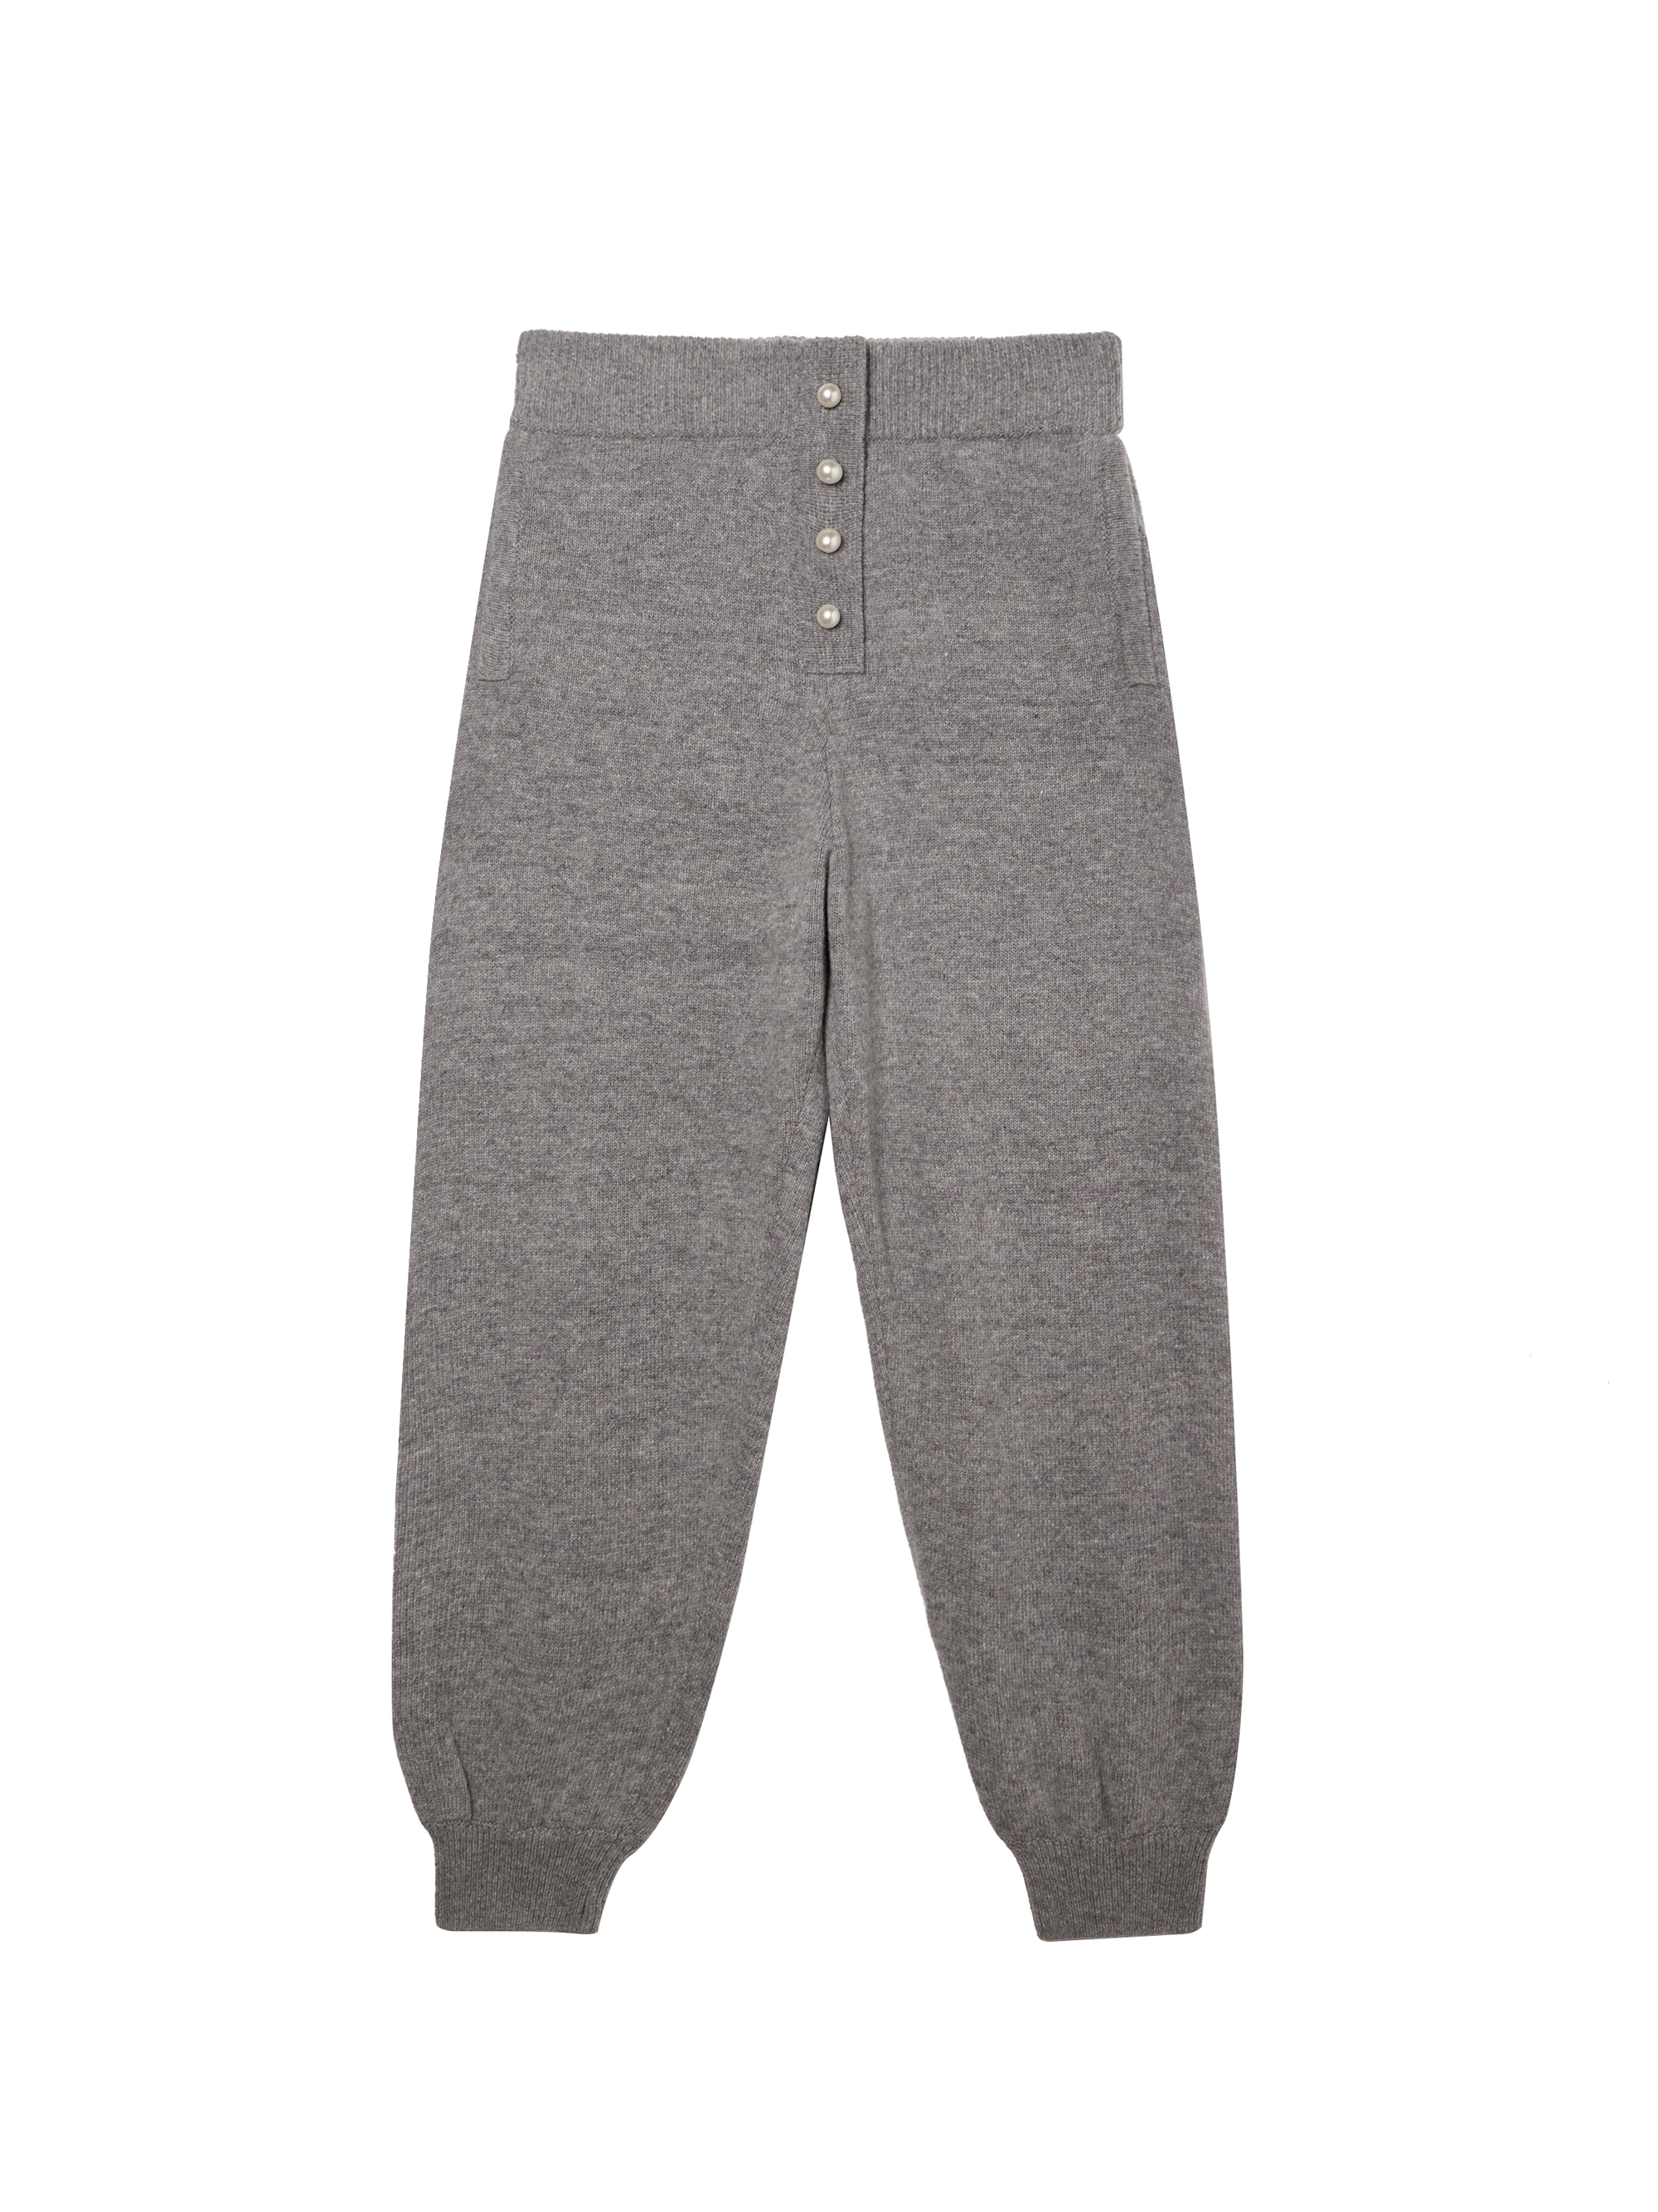 Pearl Button Detail Wool Cashmere Jogger Pants / 펄 버튼 디테일 울 캐시미어 조거 팬츠